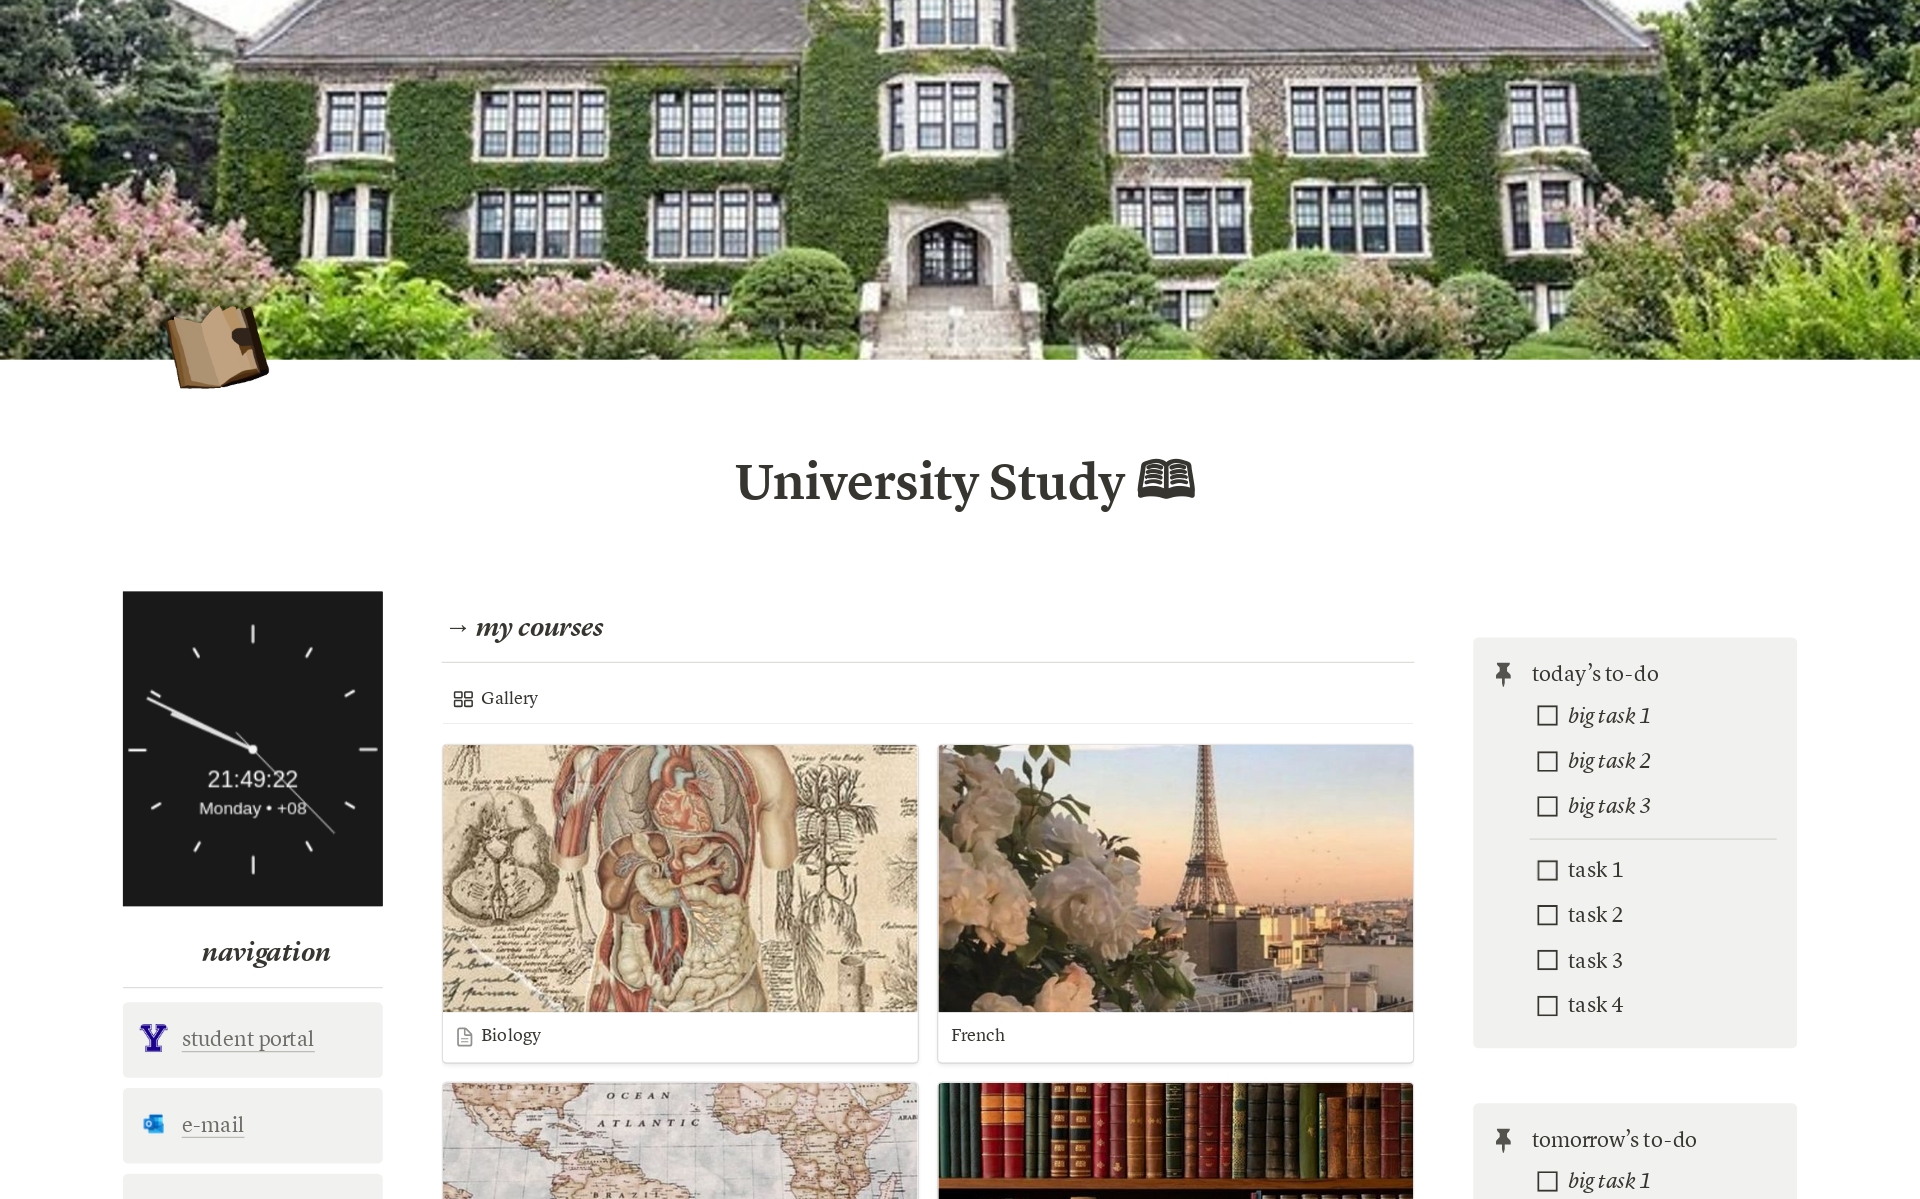 Stay organized with our Ultimate University Notion Template. Manage courses, assignments, and schedules effortlessly. Includes a course dashboard, task tracker, project management tools, and a personal journal. Customizable aesthetics for a personalized workspace.